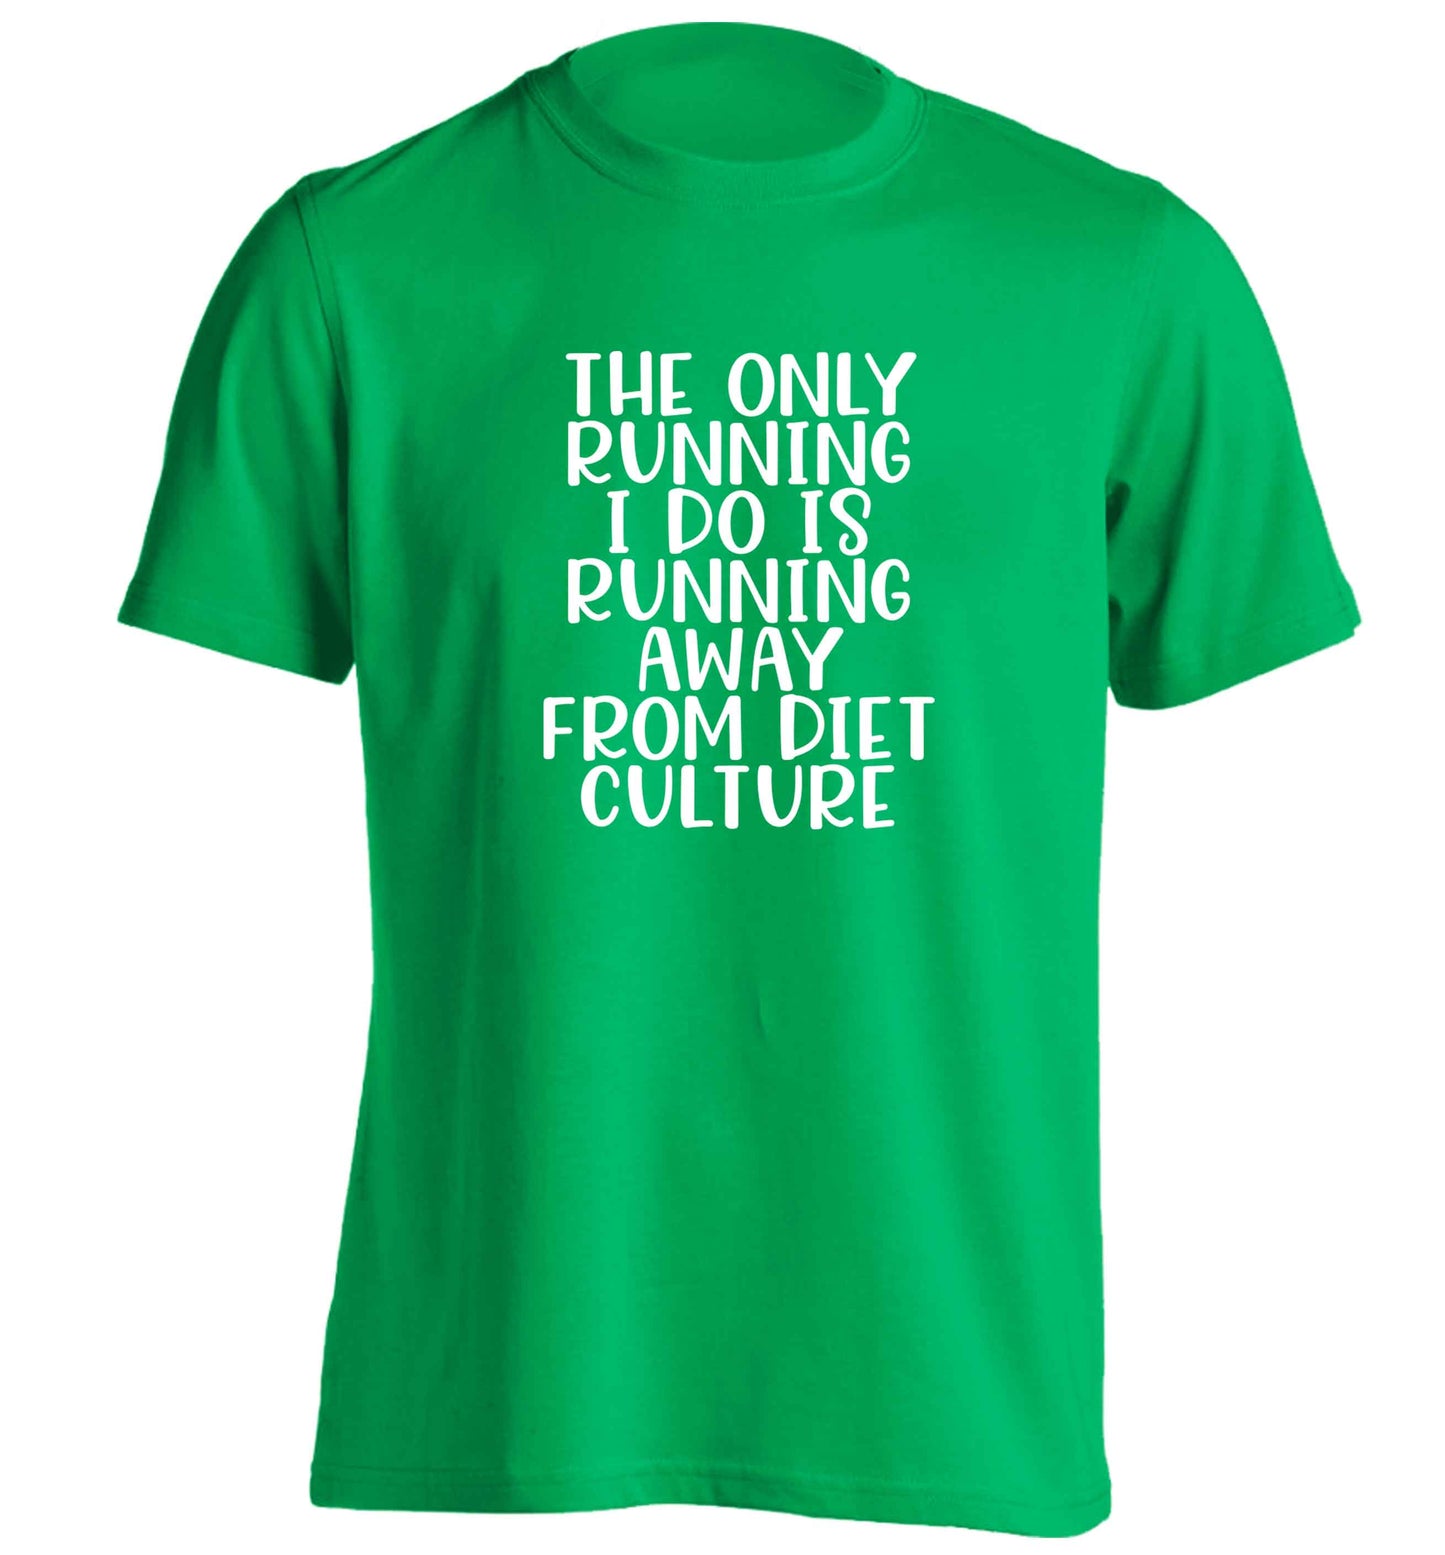 The only running I do is running away from diet culture adults unisex green Tshirt 2XL